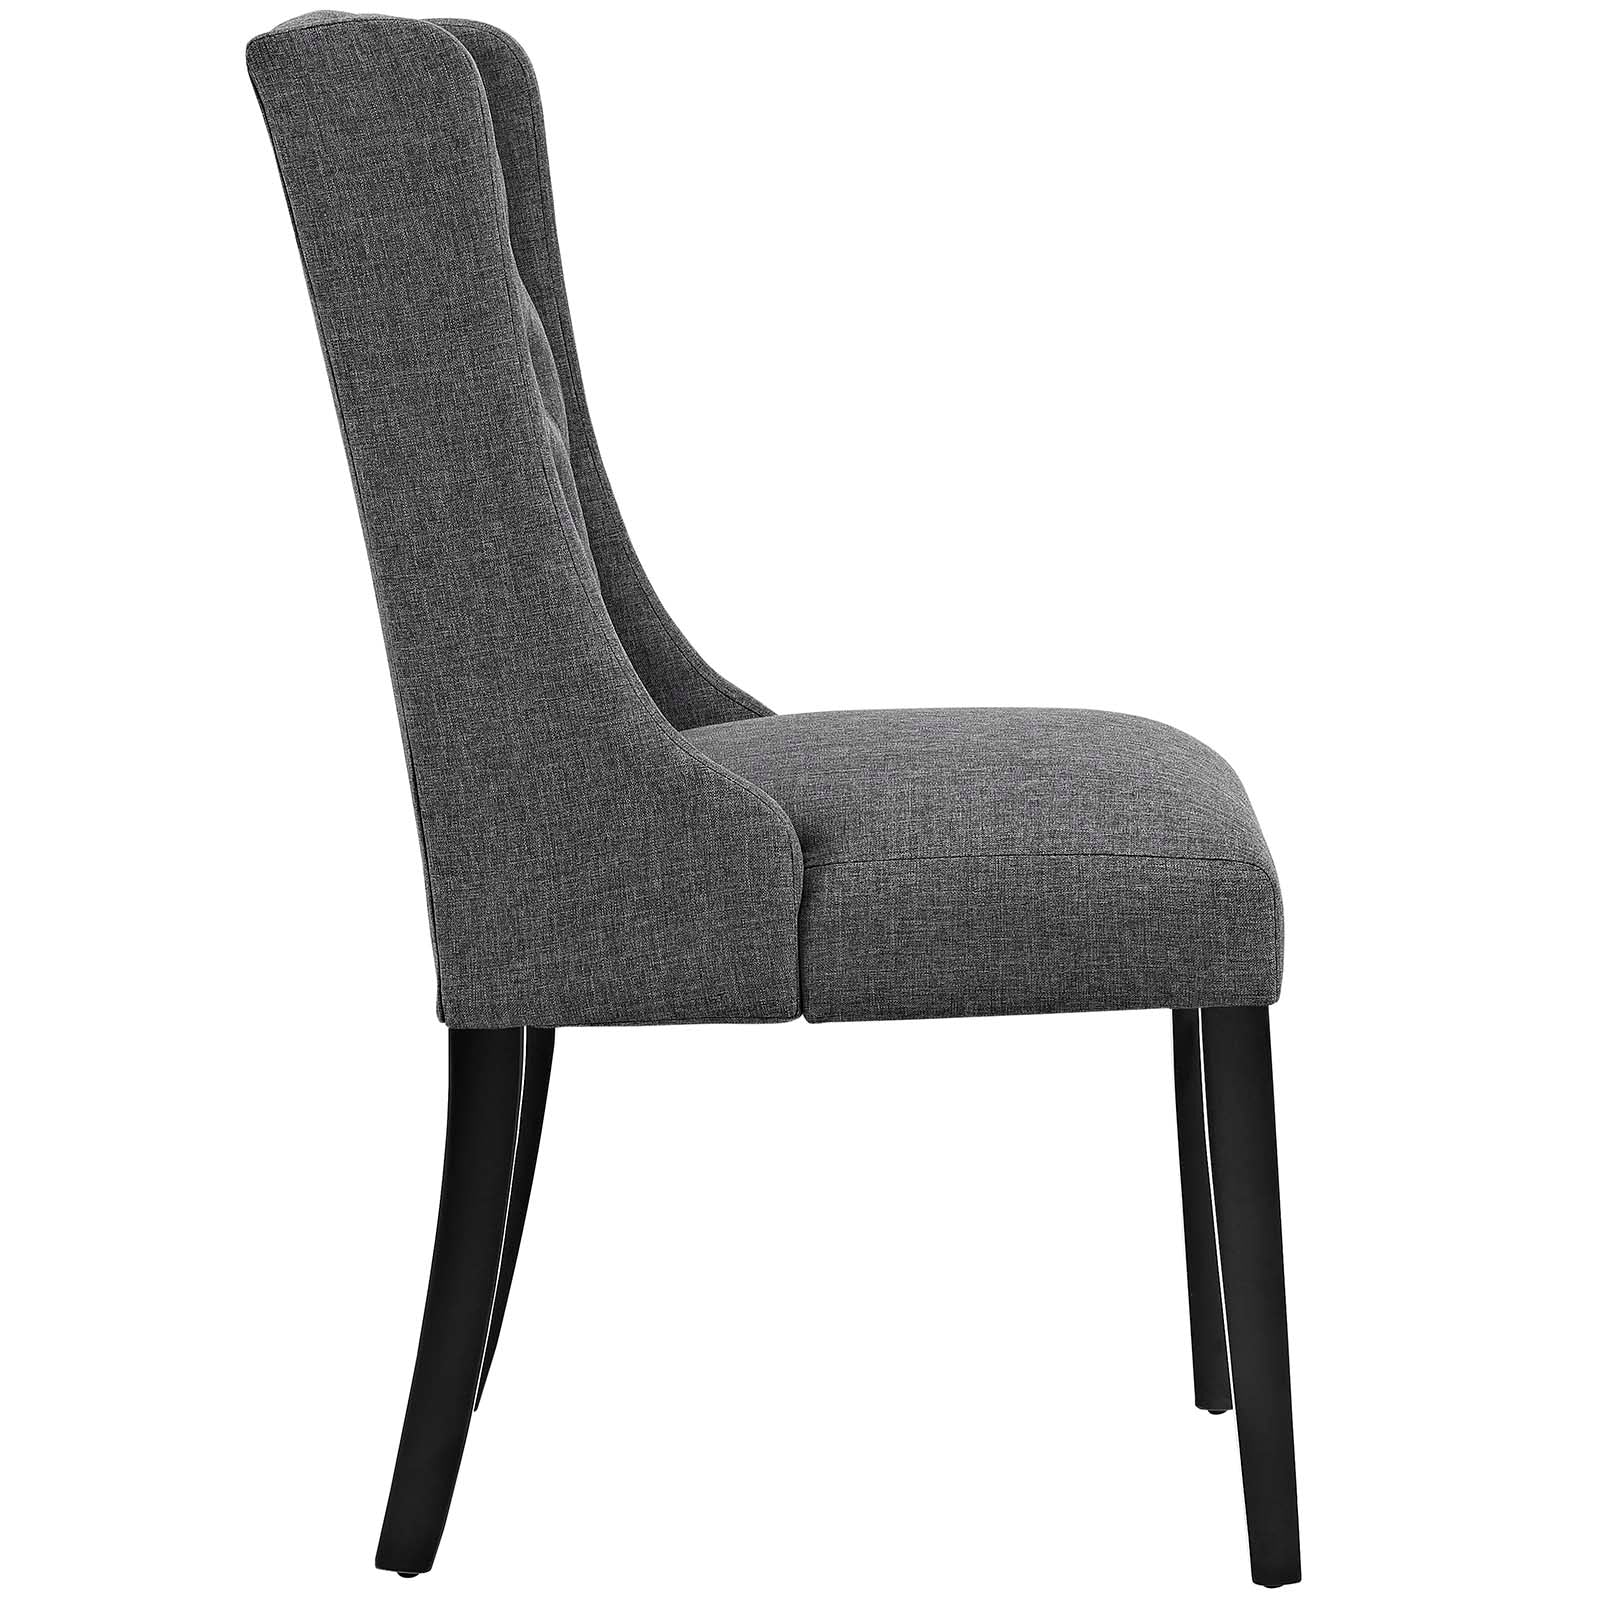 Modway Dining Chairs - Baronet Dining Chair Fabric Gray (Set of 4)